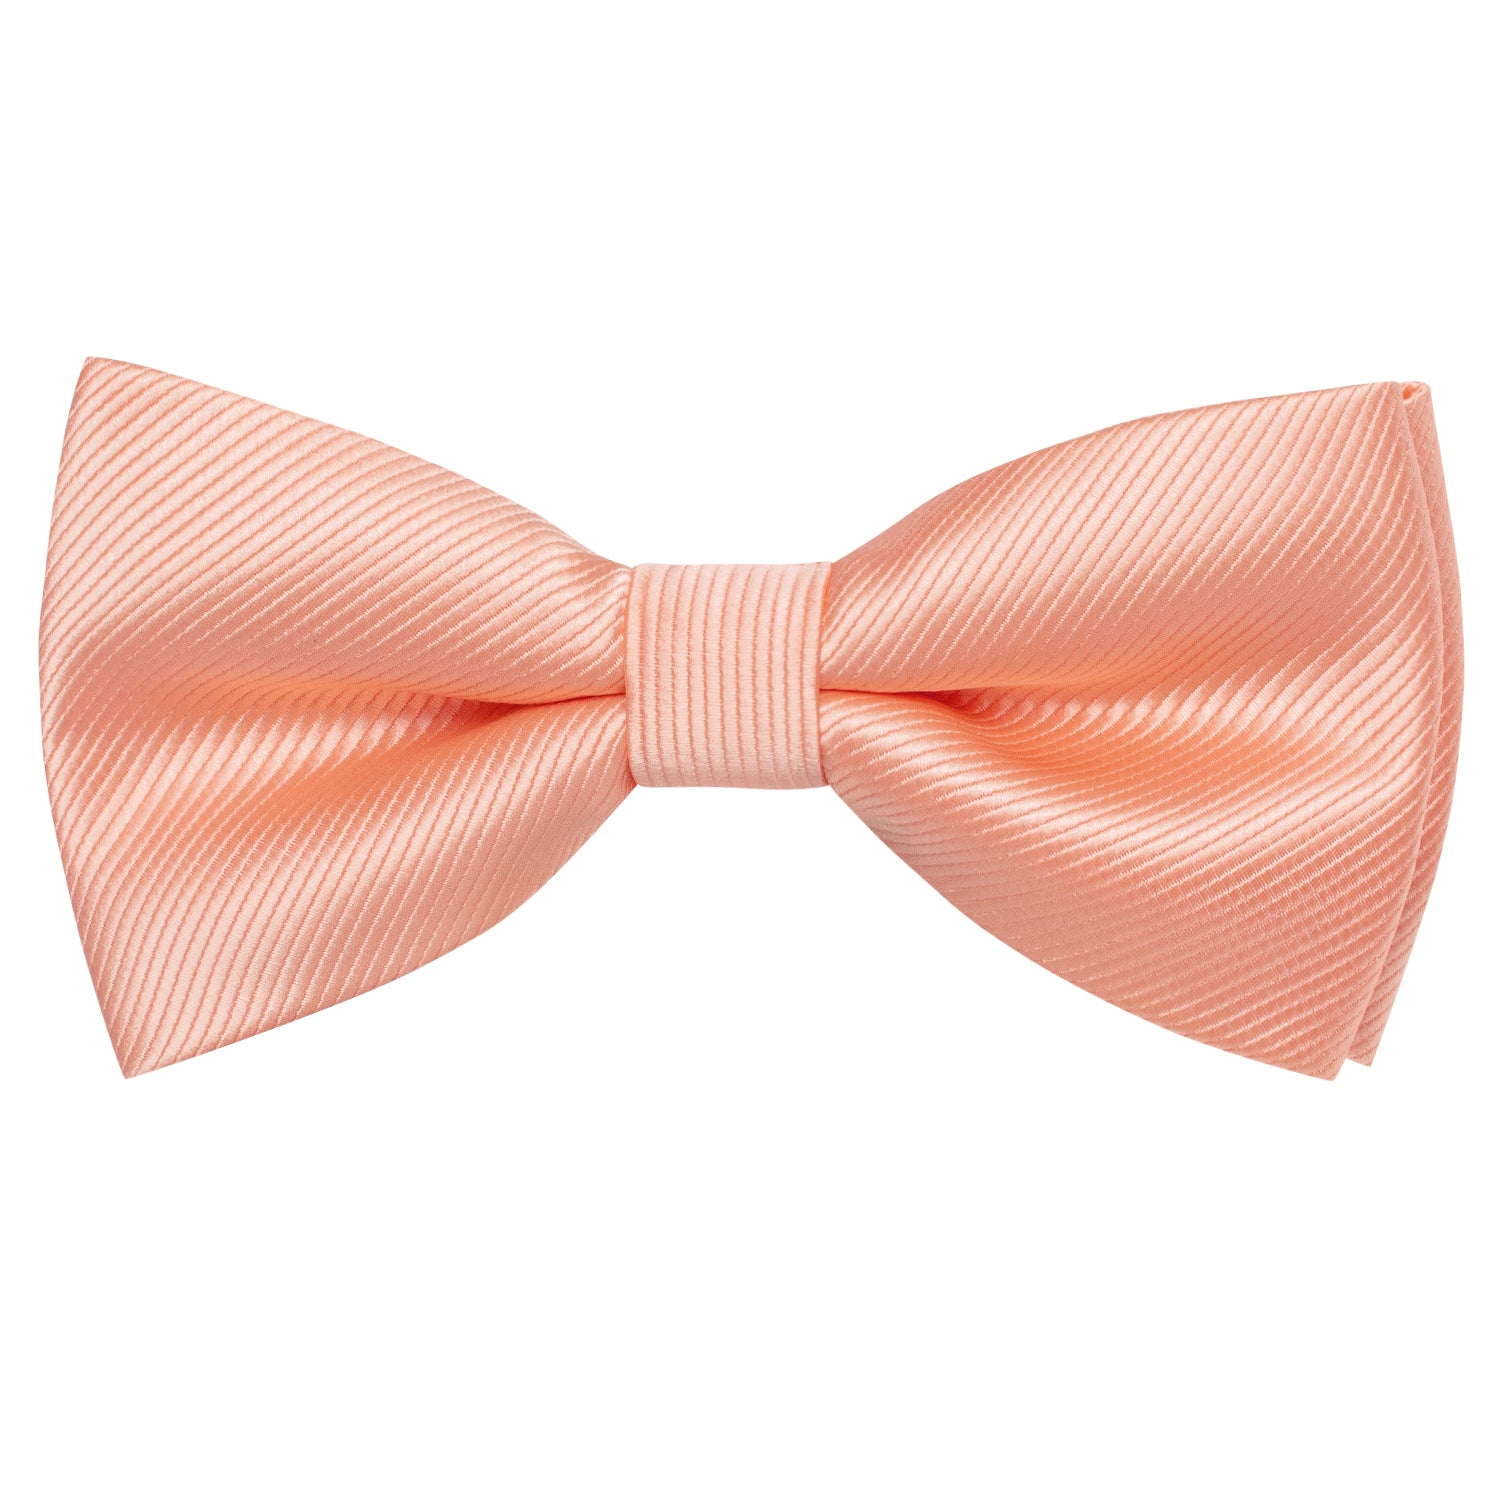 Coral Pink Striped Pre-tied Bow Tie Hanky Cufflinks Set